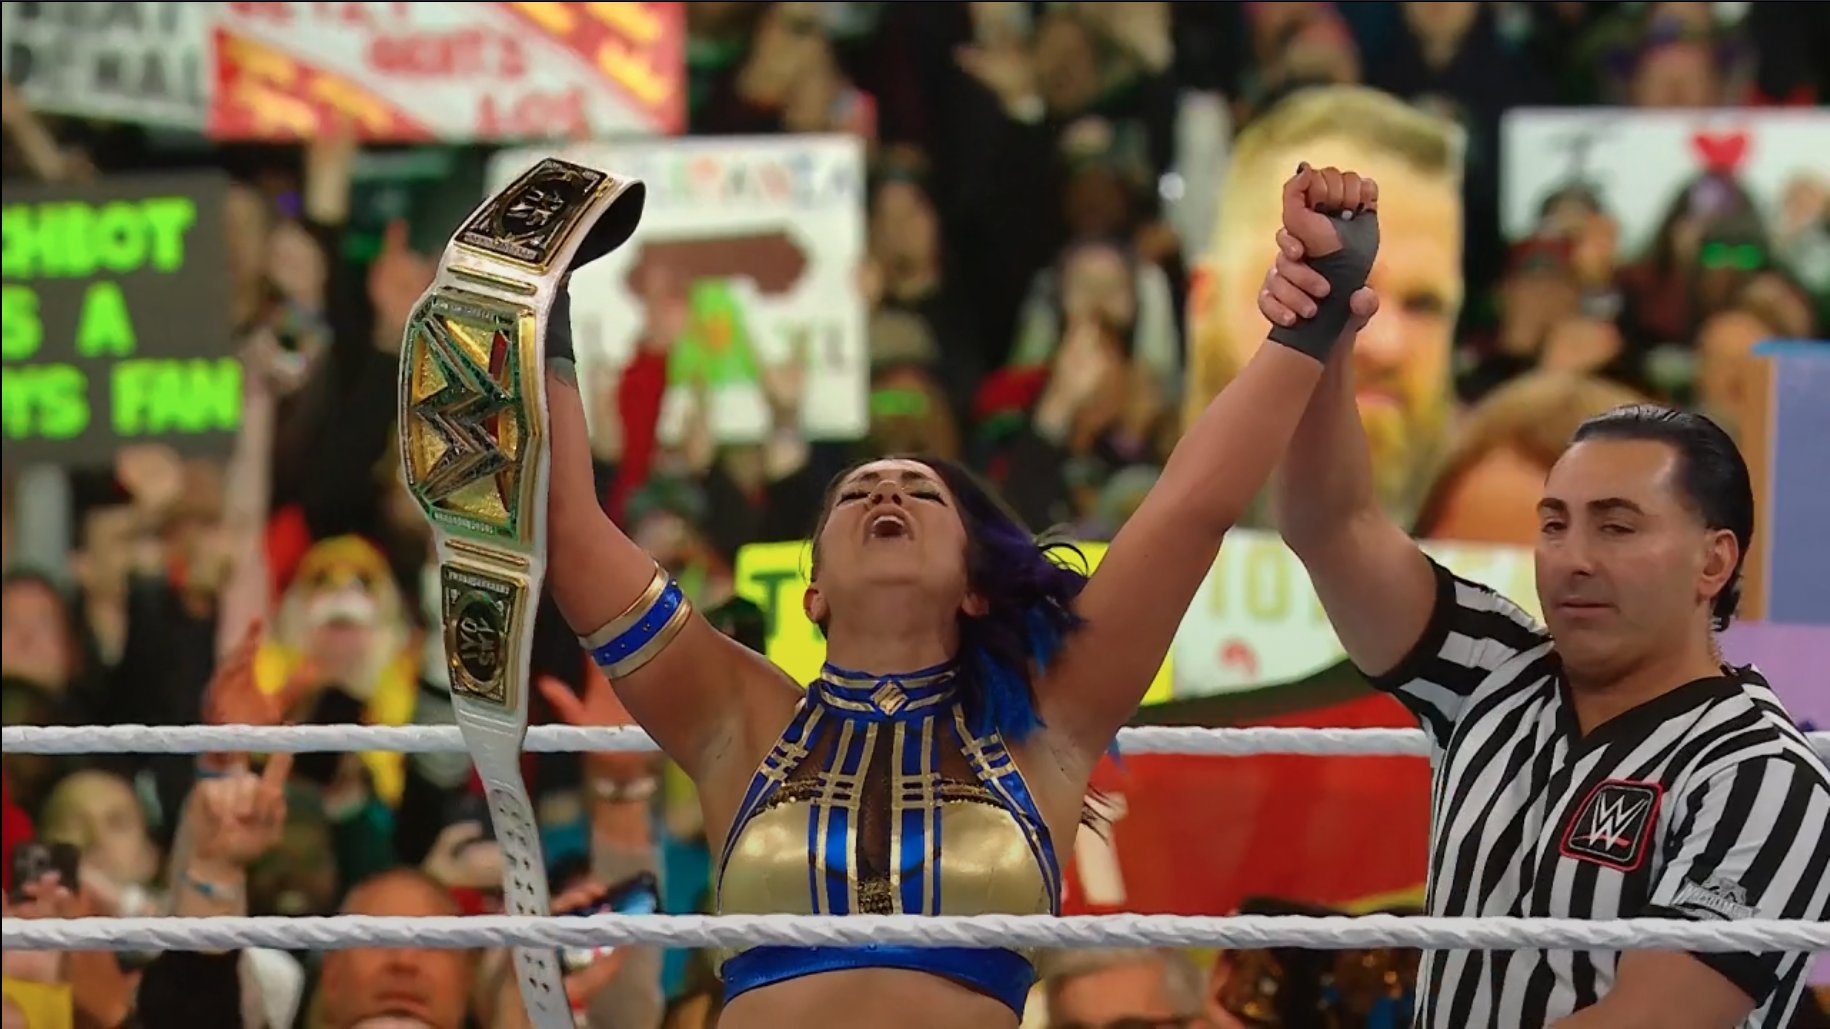 Bayley Sets Sights on WrestleMania Main Event After Historic Win